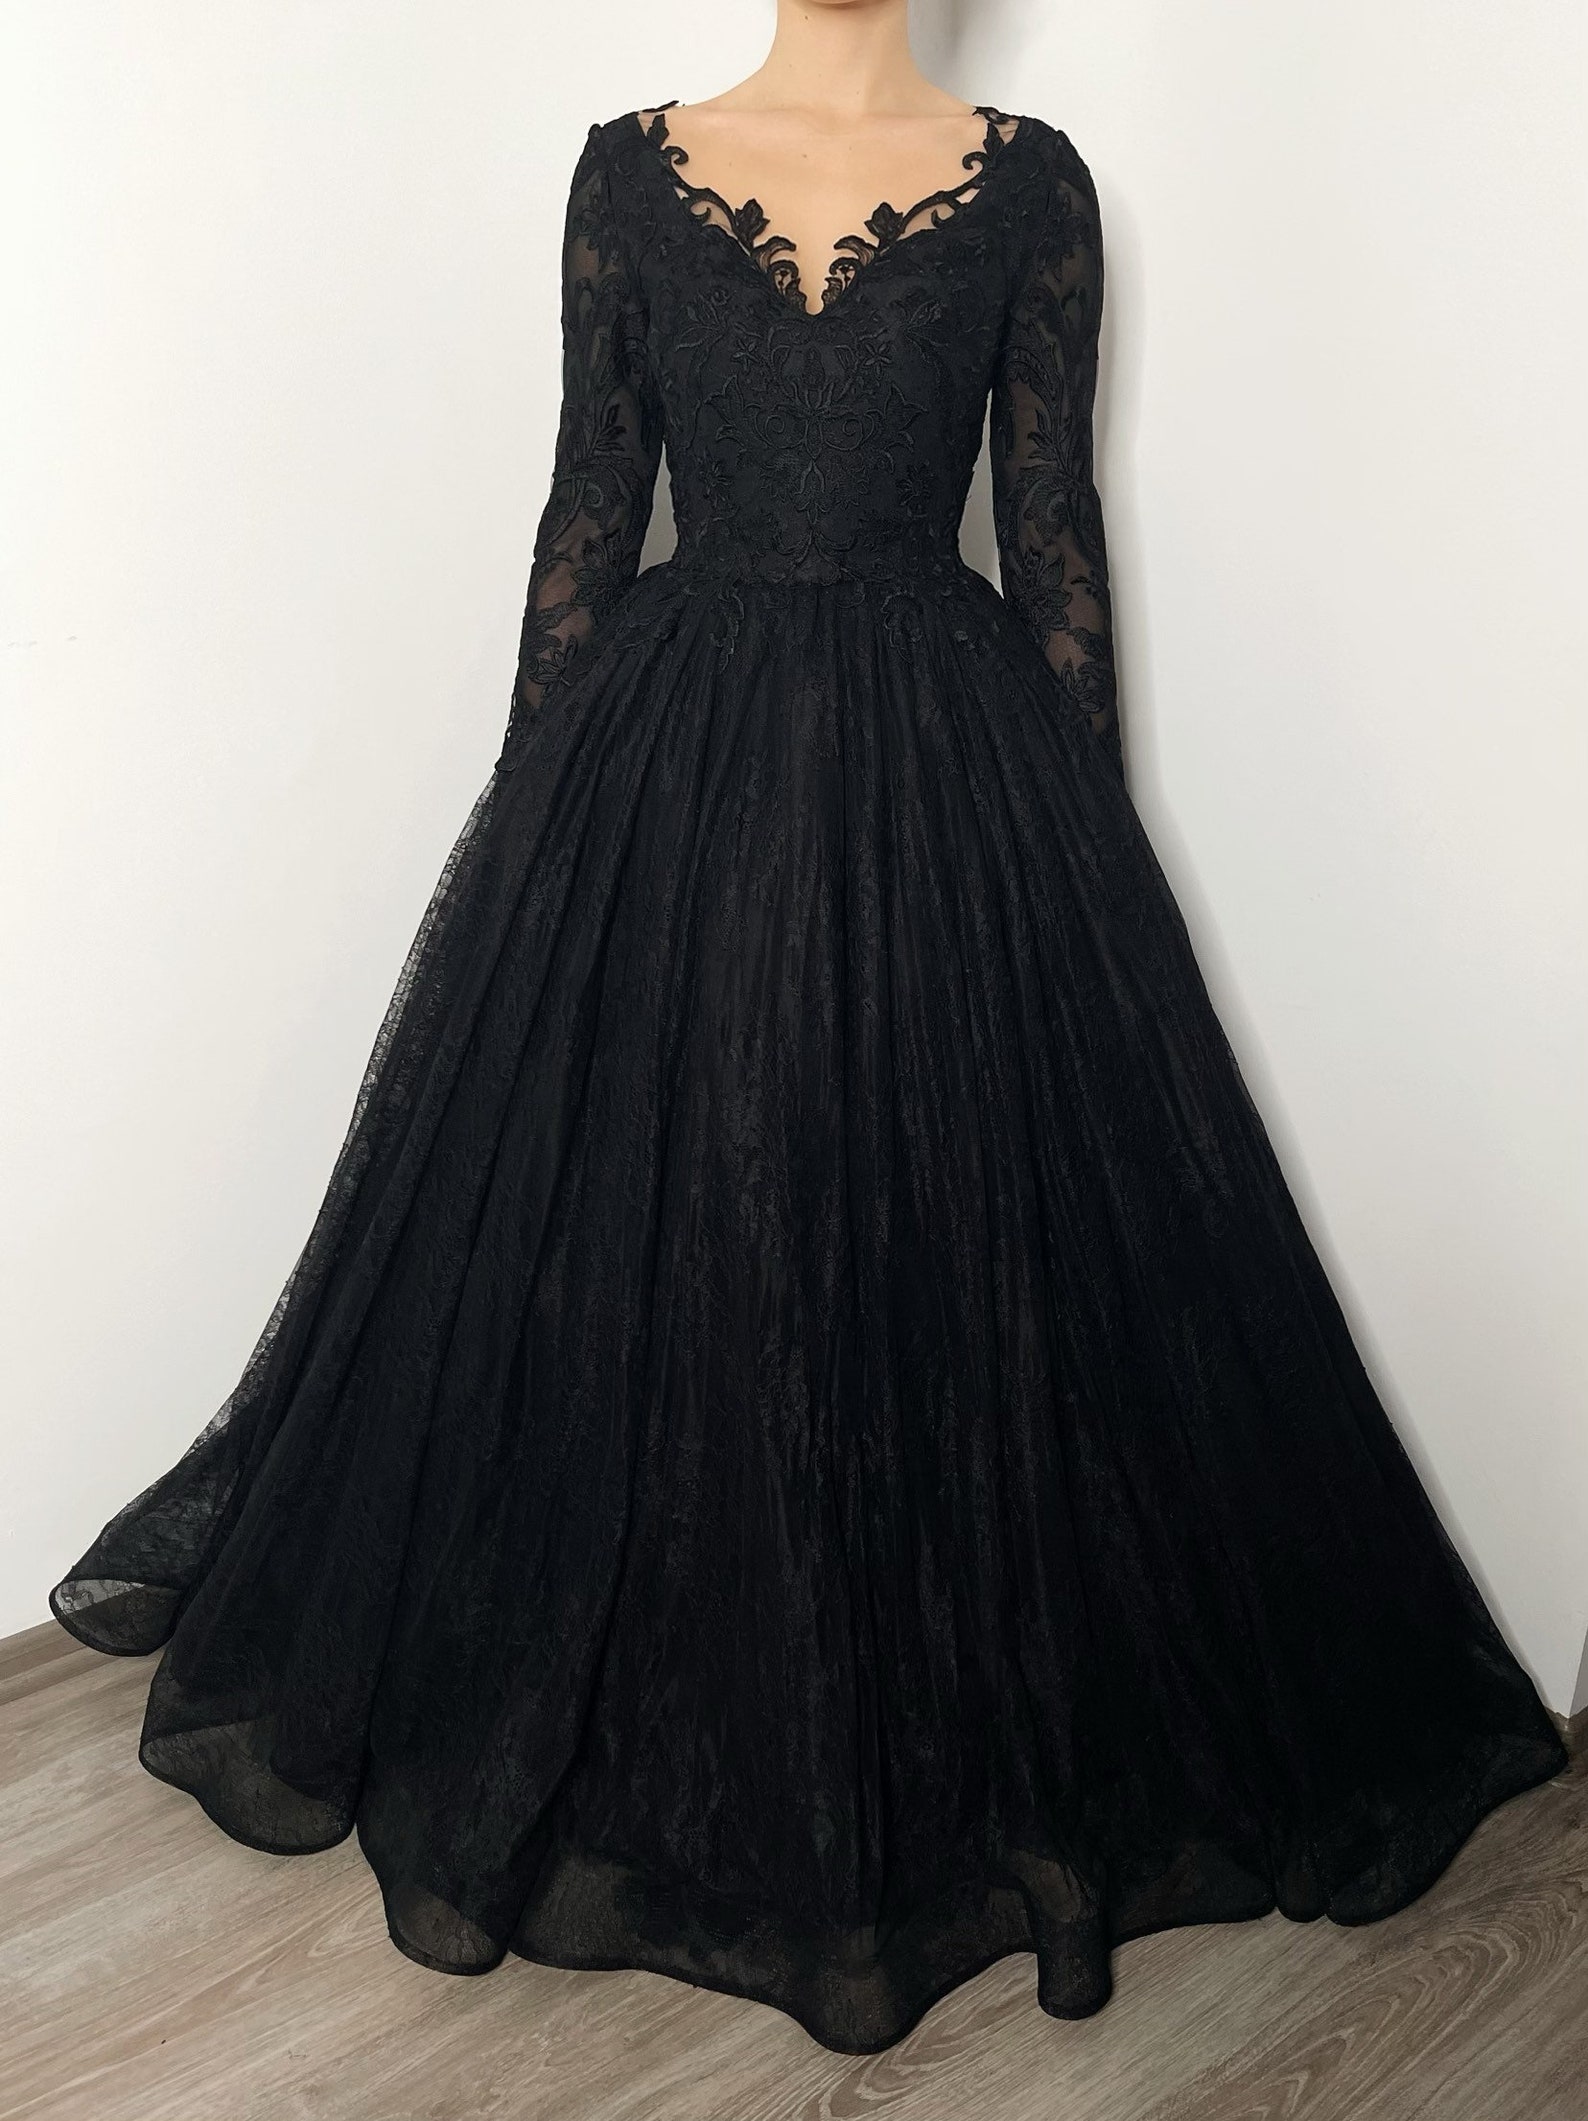 Black Gothic Romantic Wedding Lace Dress With Buttons - Etsy